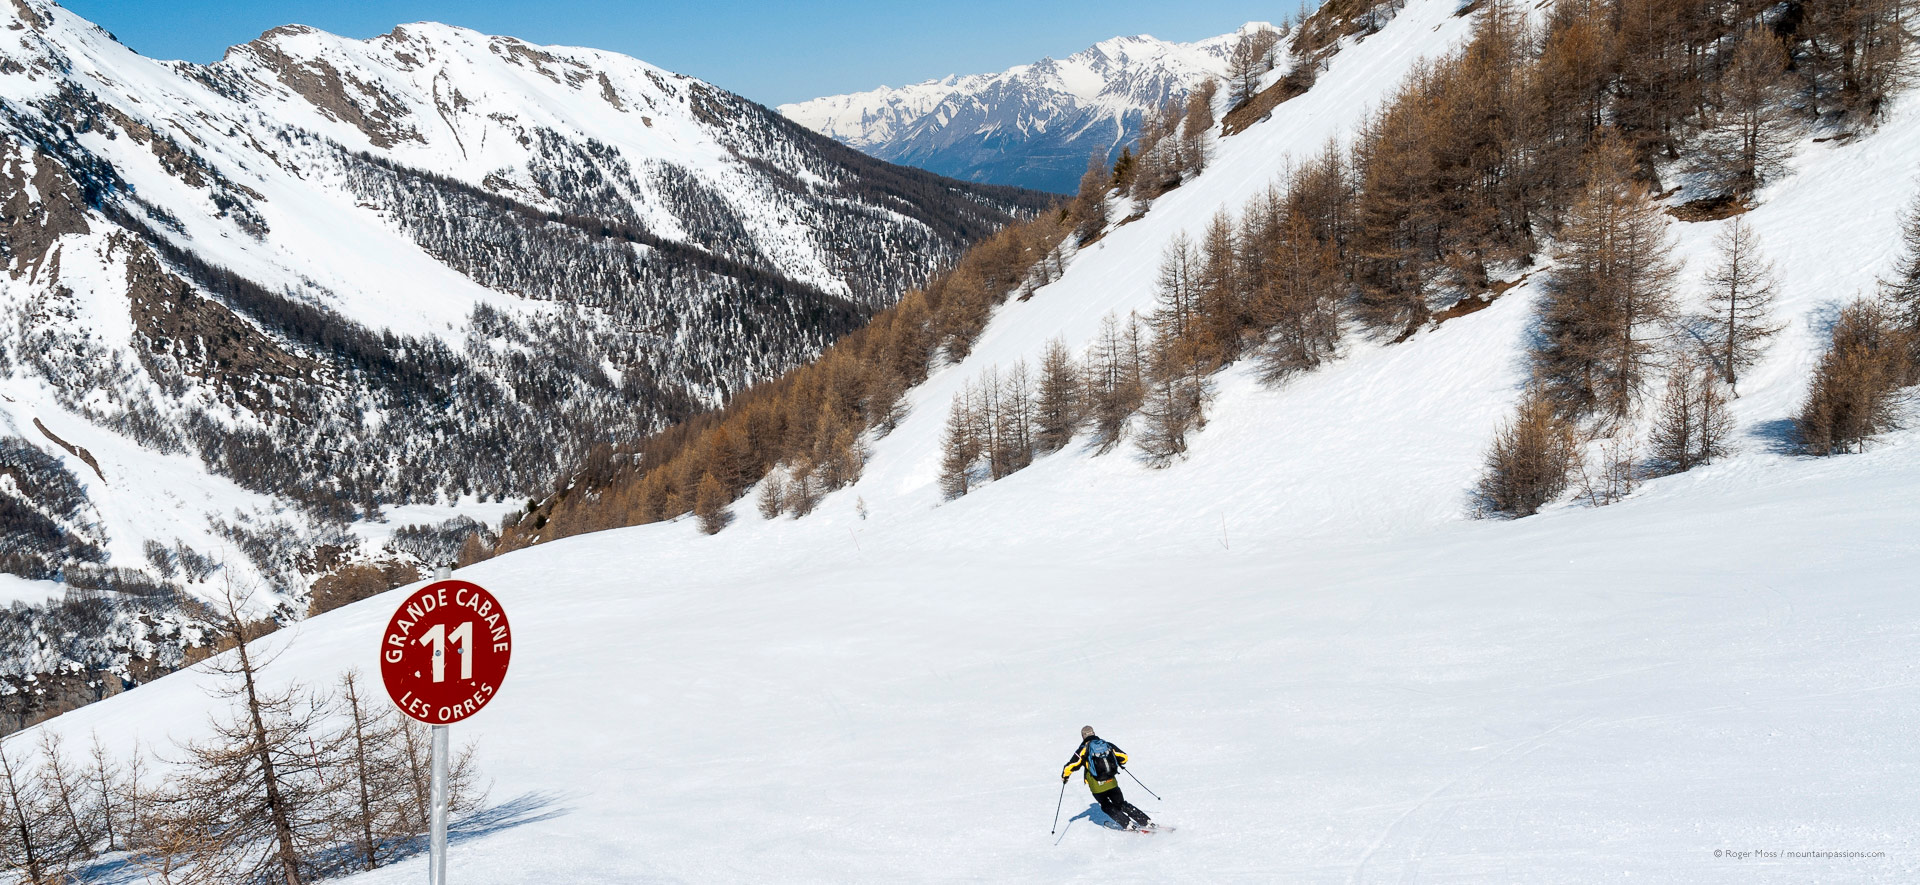 Lone skier descending red piste with beautiful mountain scenery.